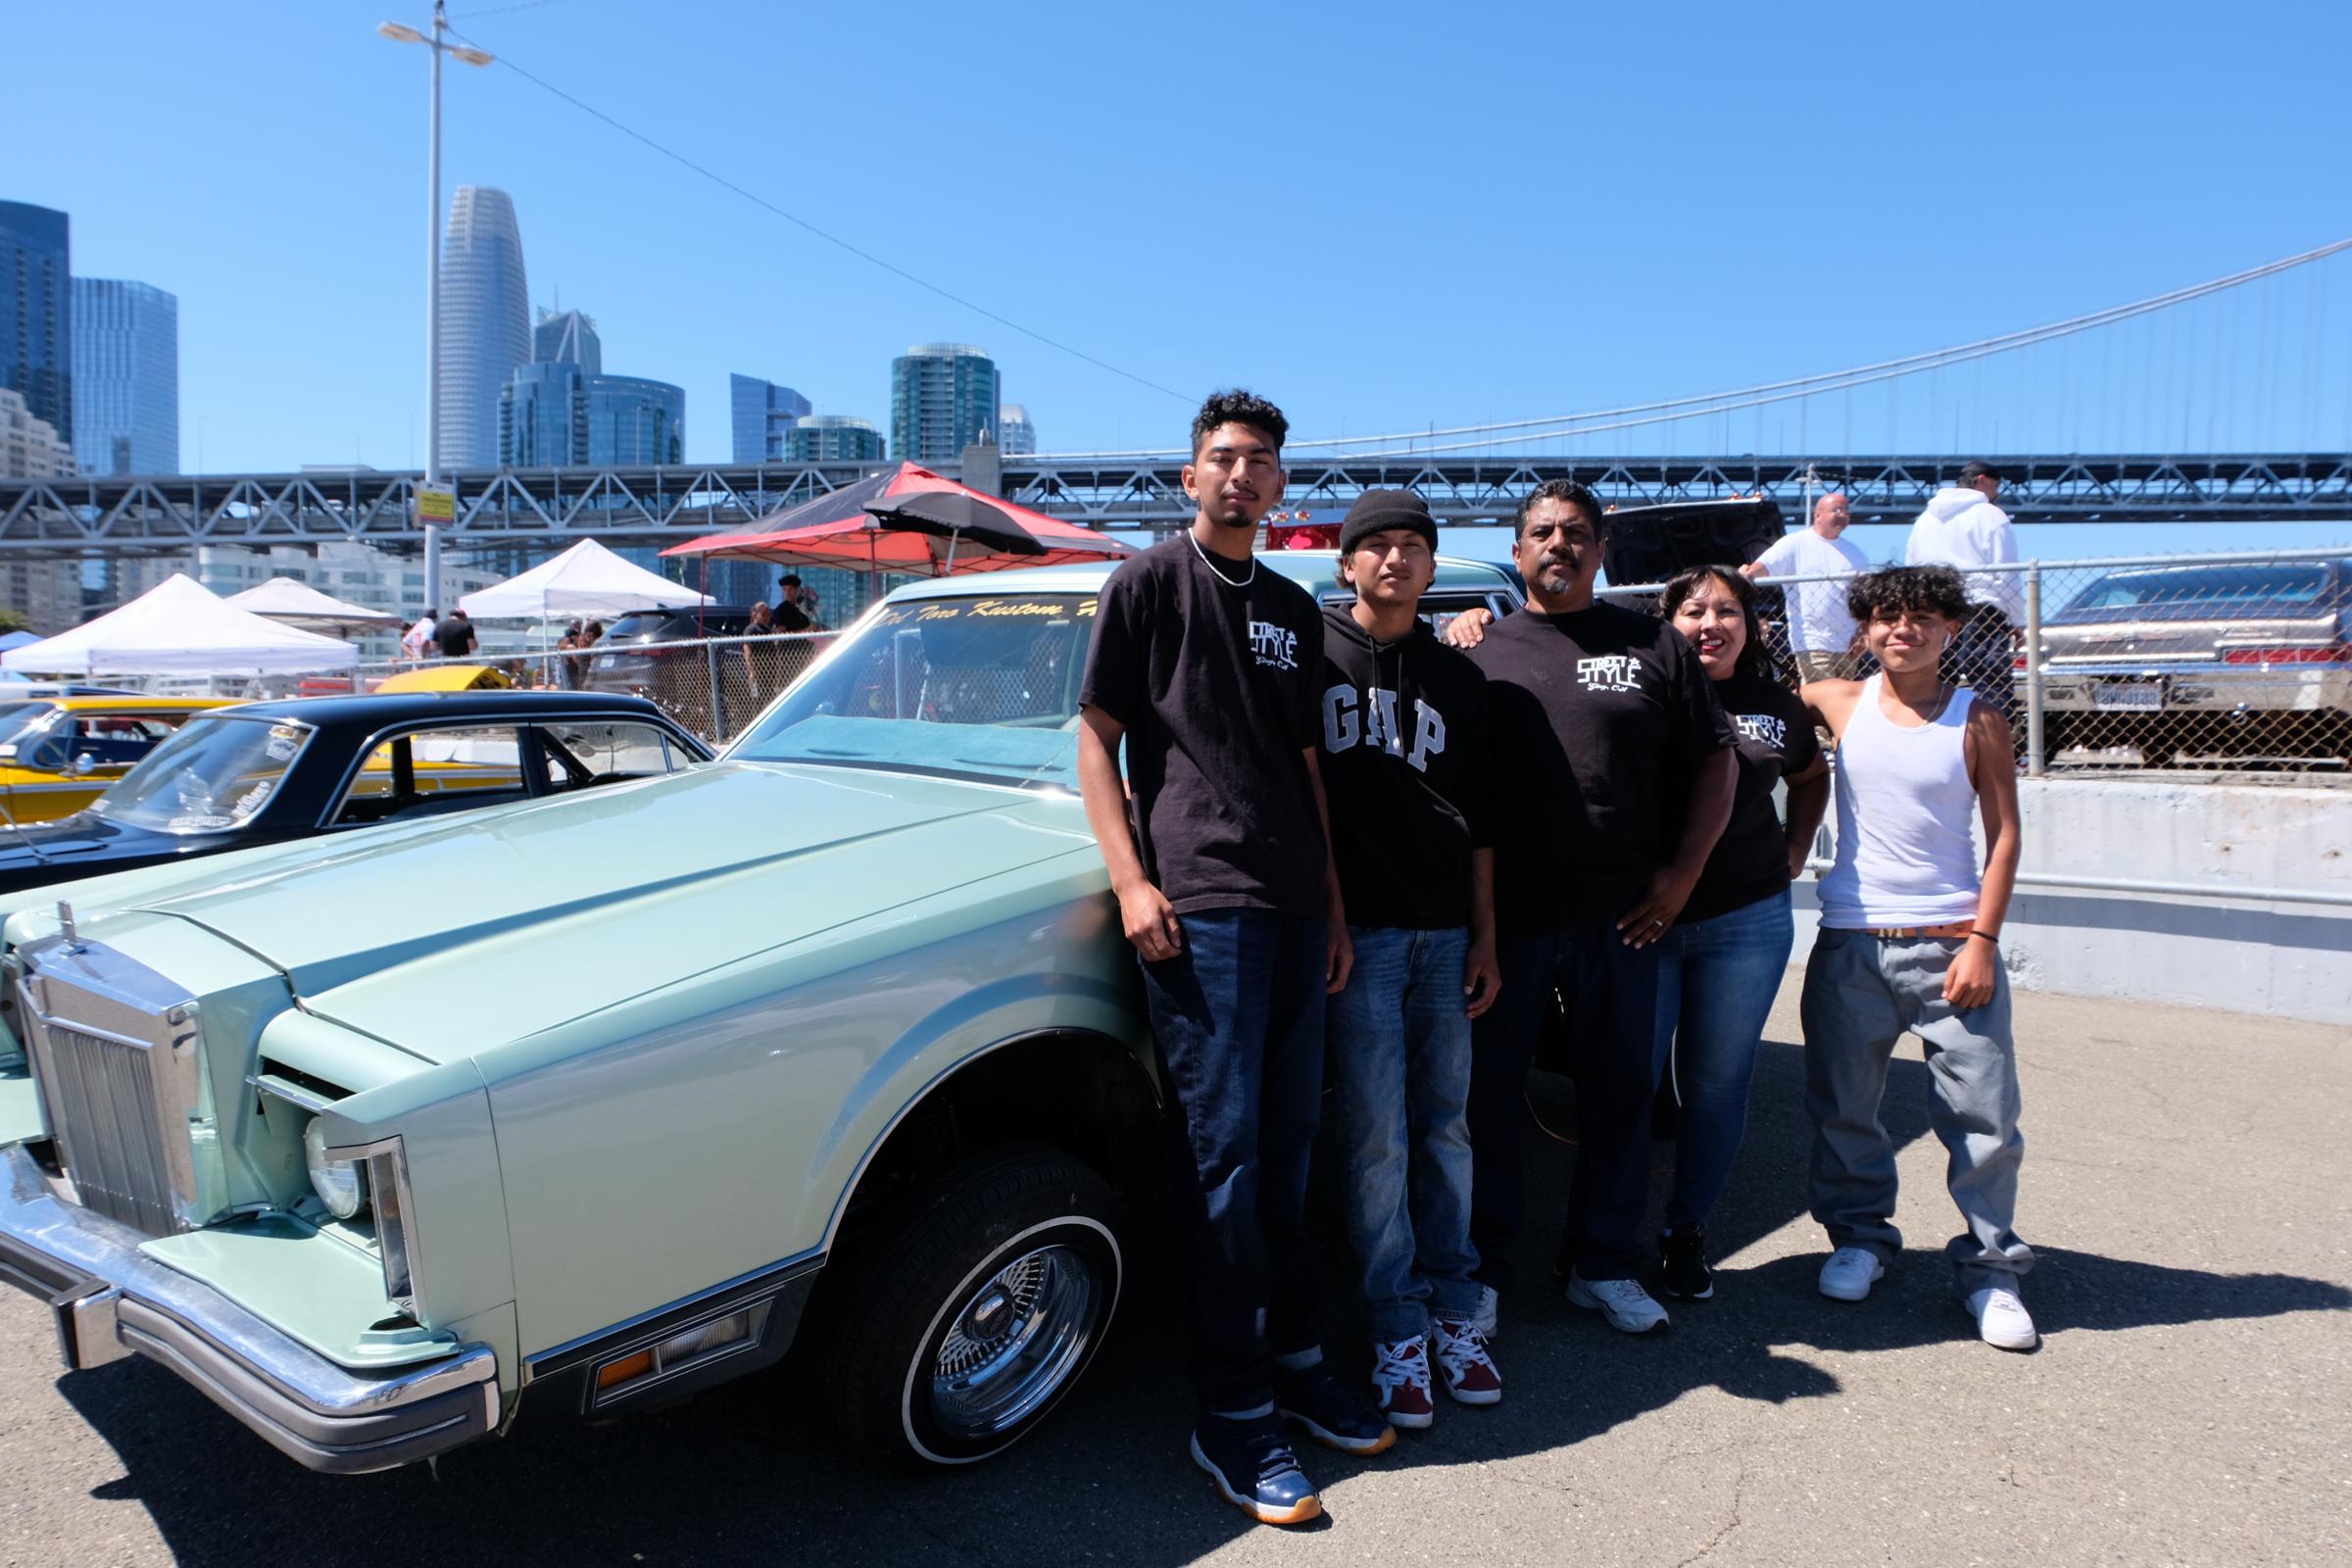 Lowriders Show: King of the Streets - Del Toro's family poses in front of one of the cars...